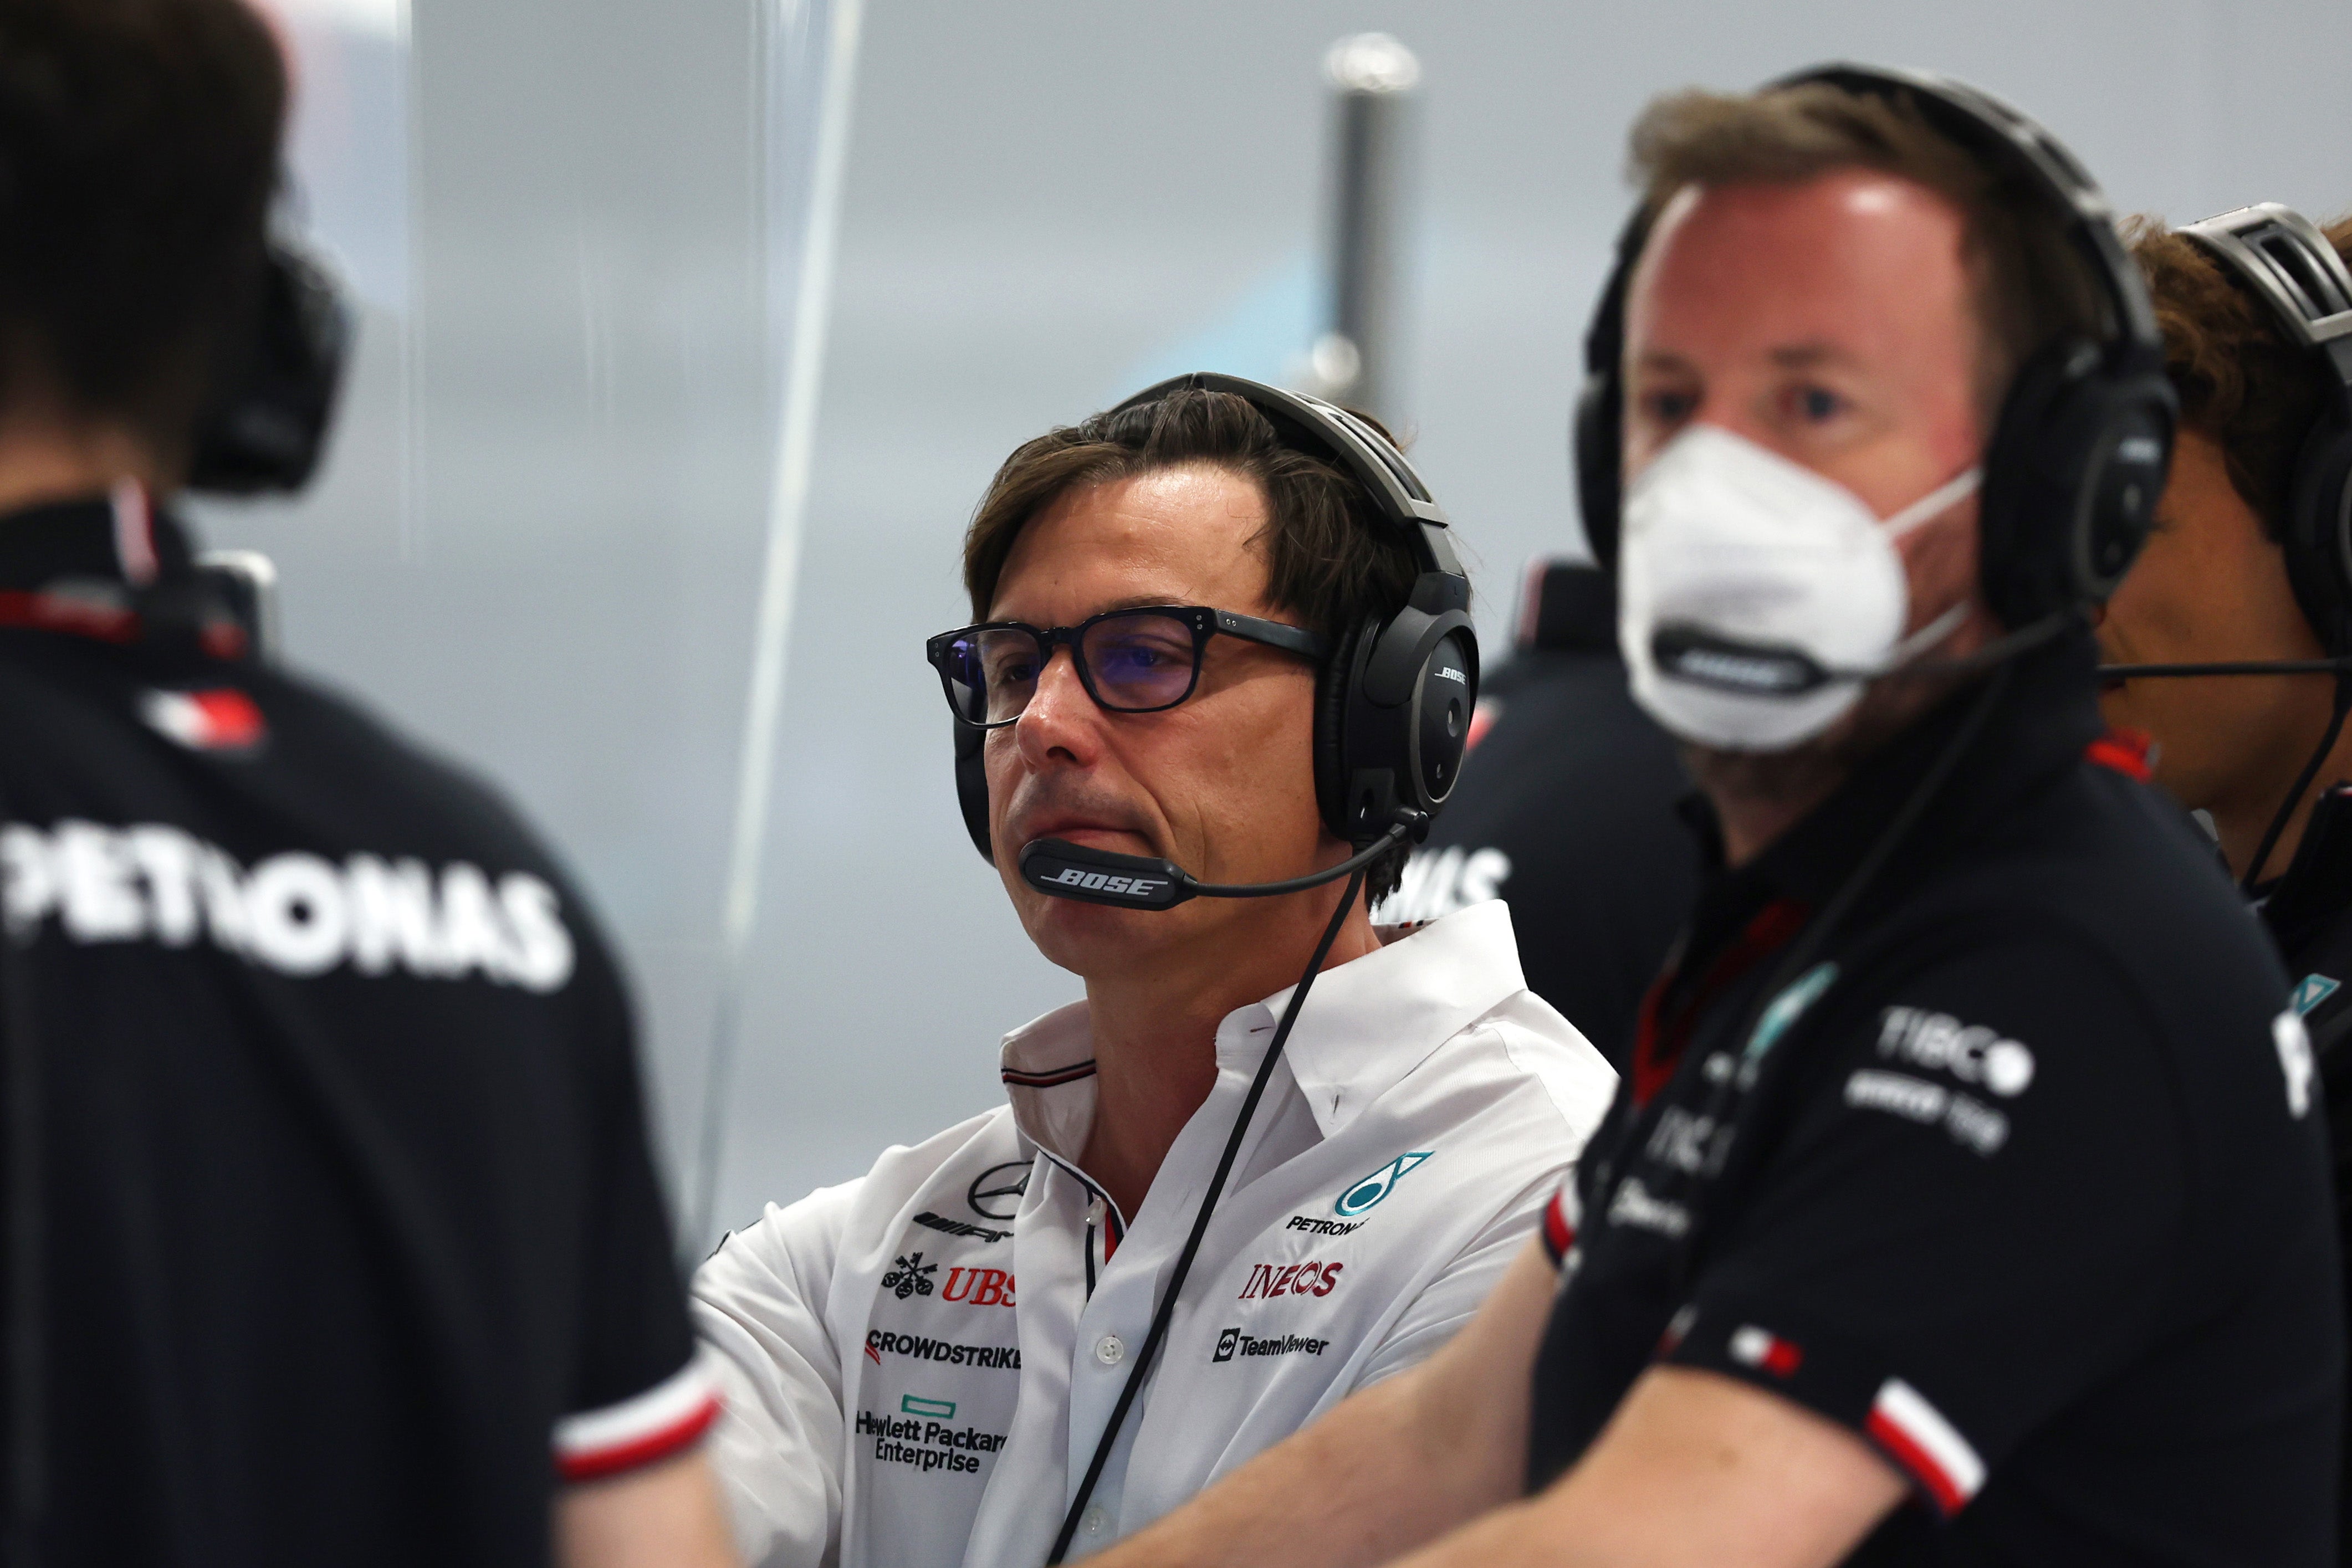 Toto Wolff believes that Mercedes must look at their problems in totality to make improvements